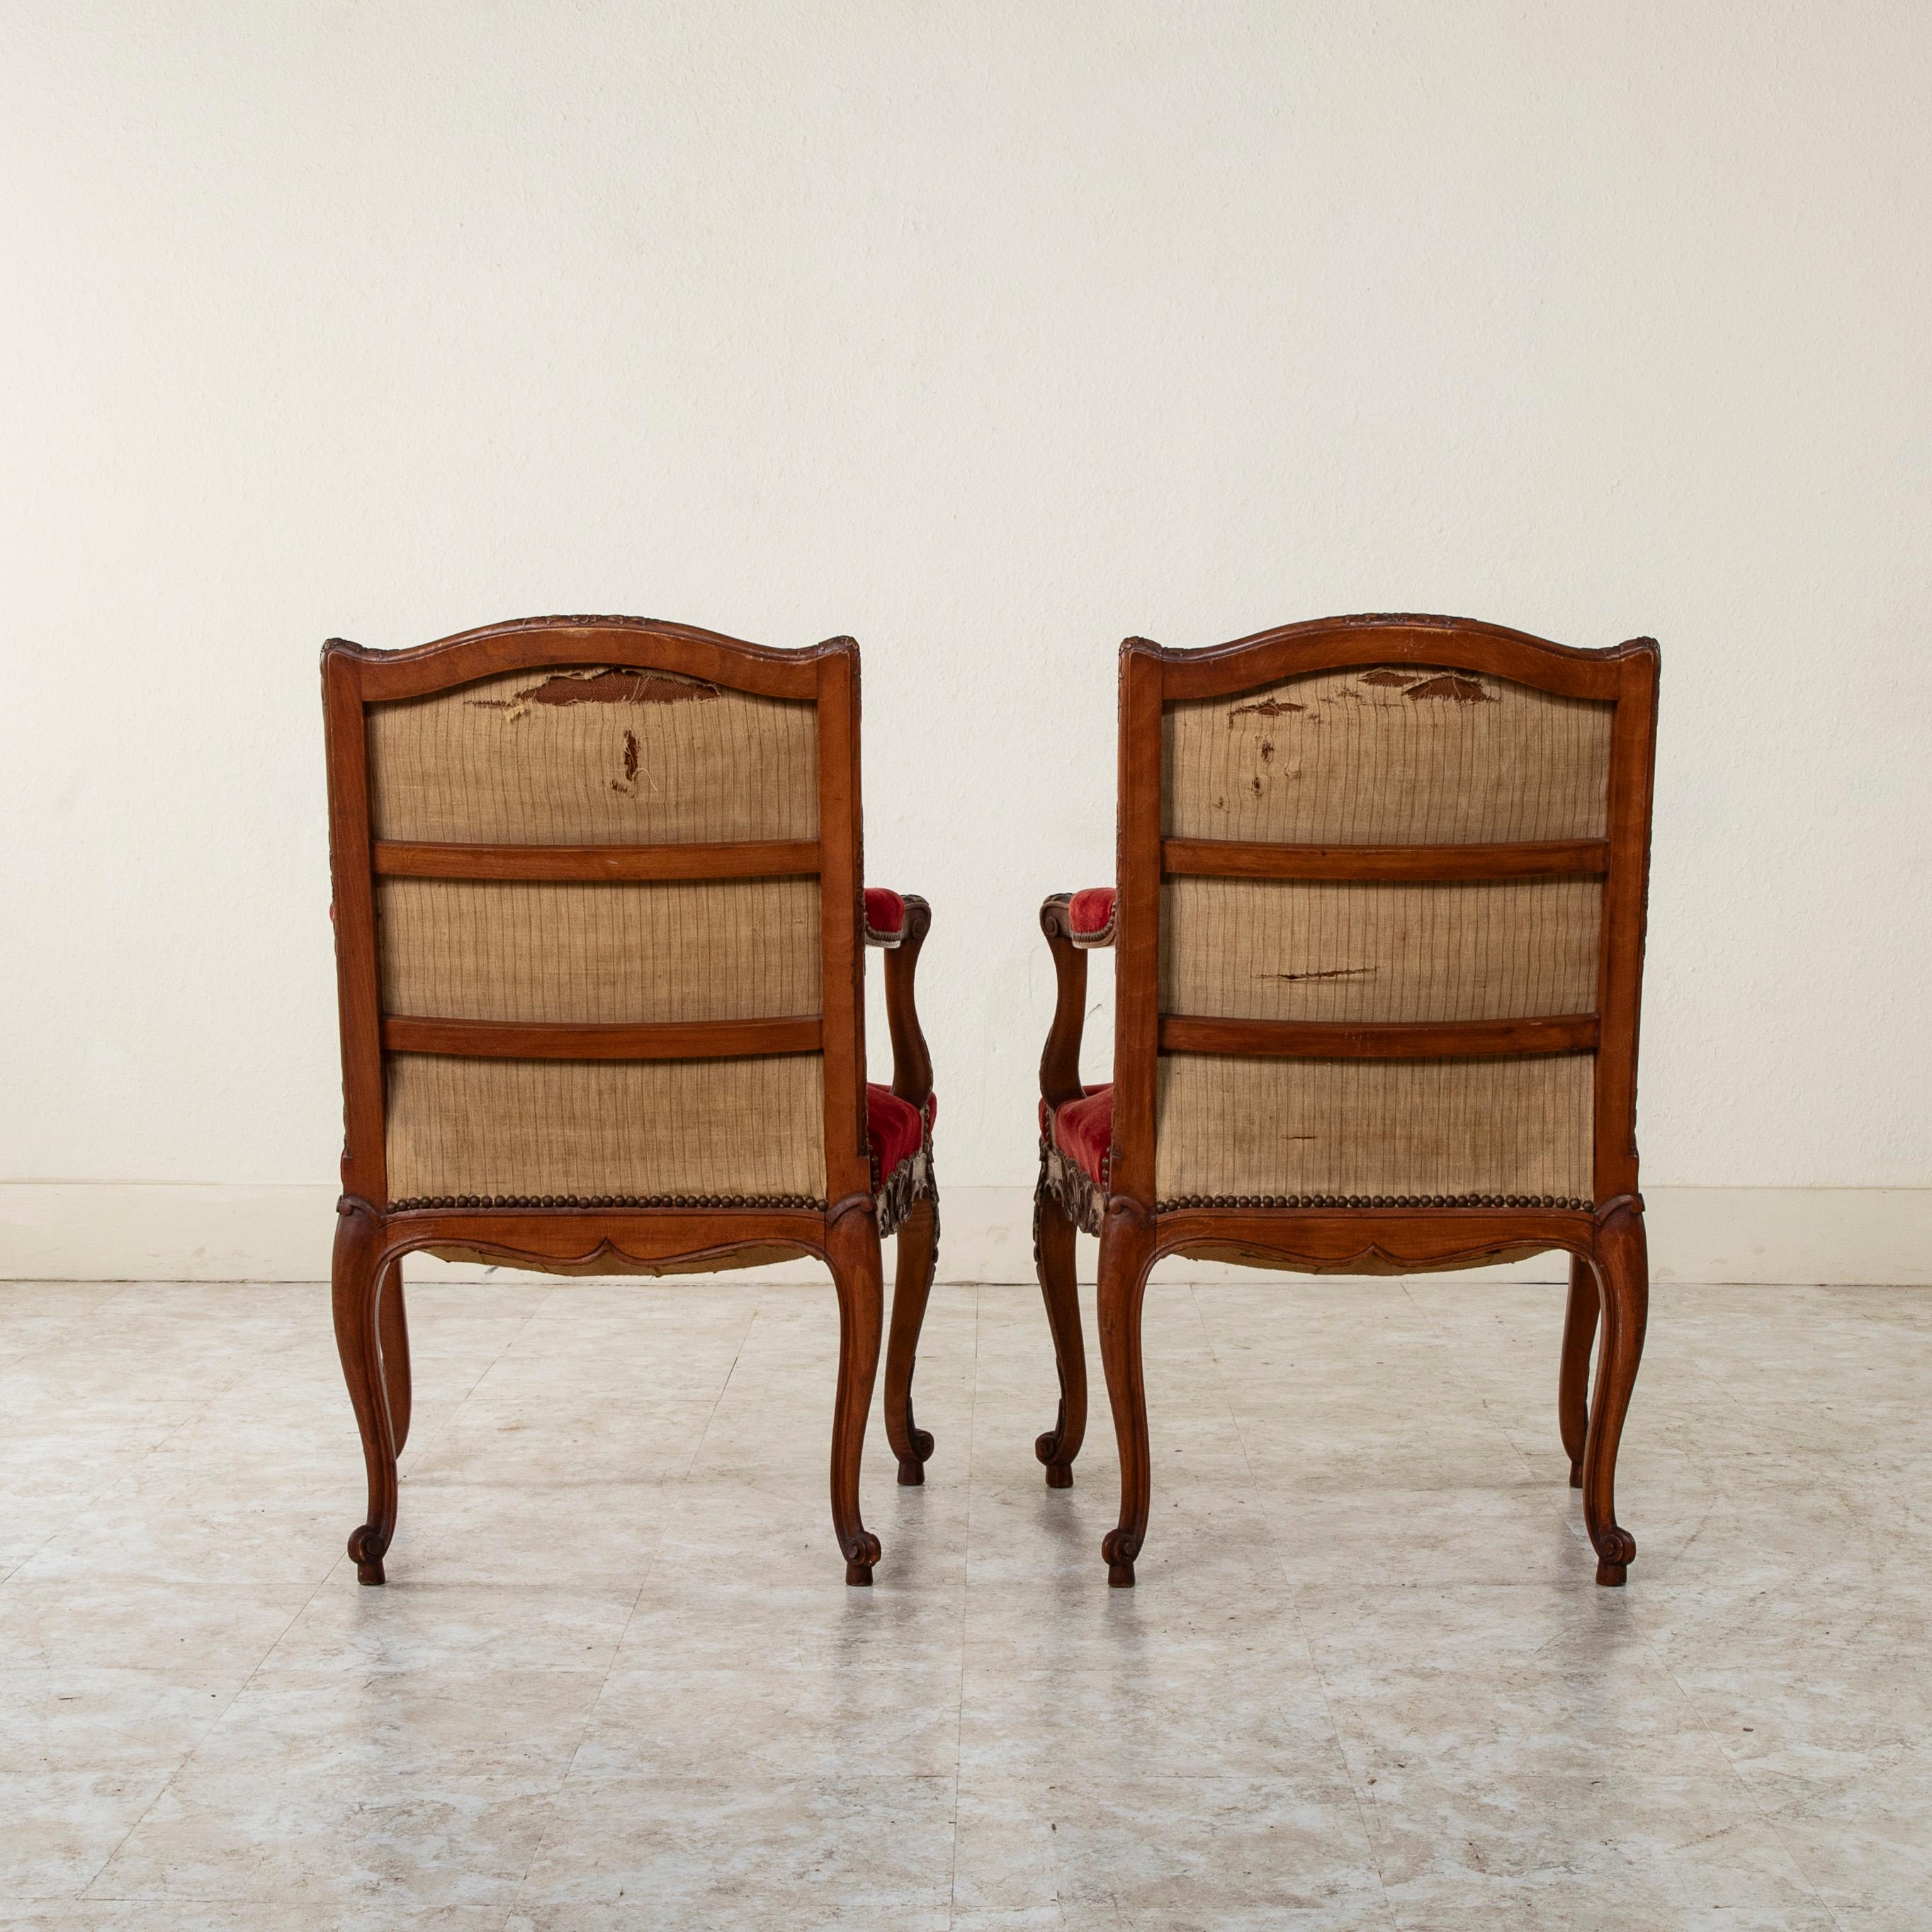 Mid 19th Century French Regency Style Hand Carved Beechwood Armchairs, Velvet For Sale 2